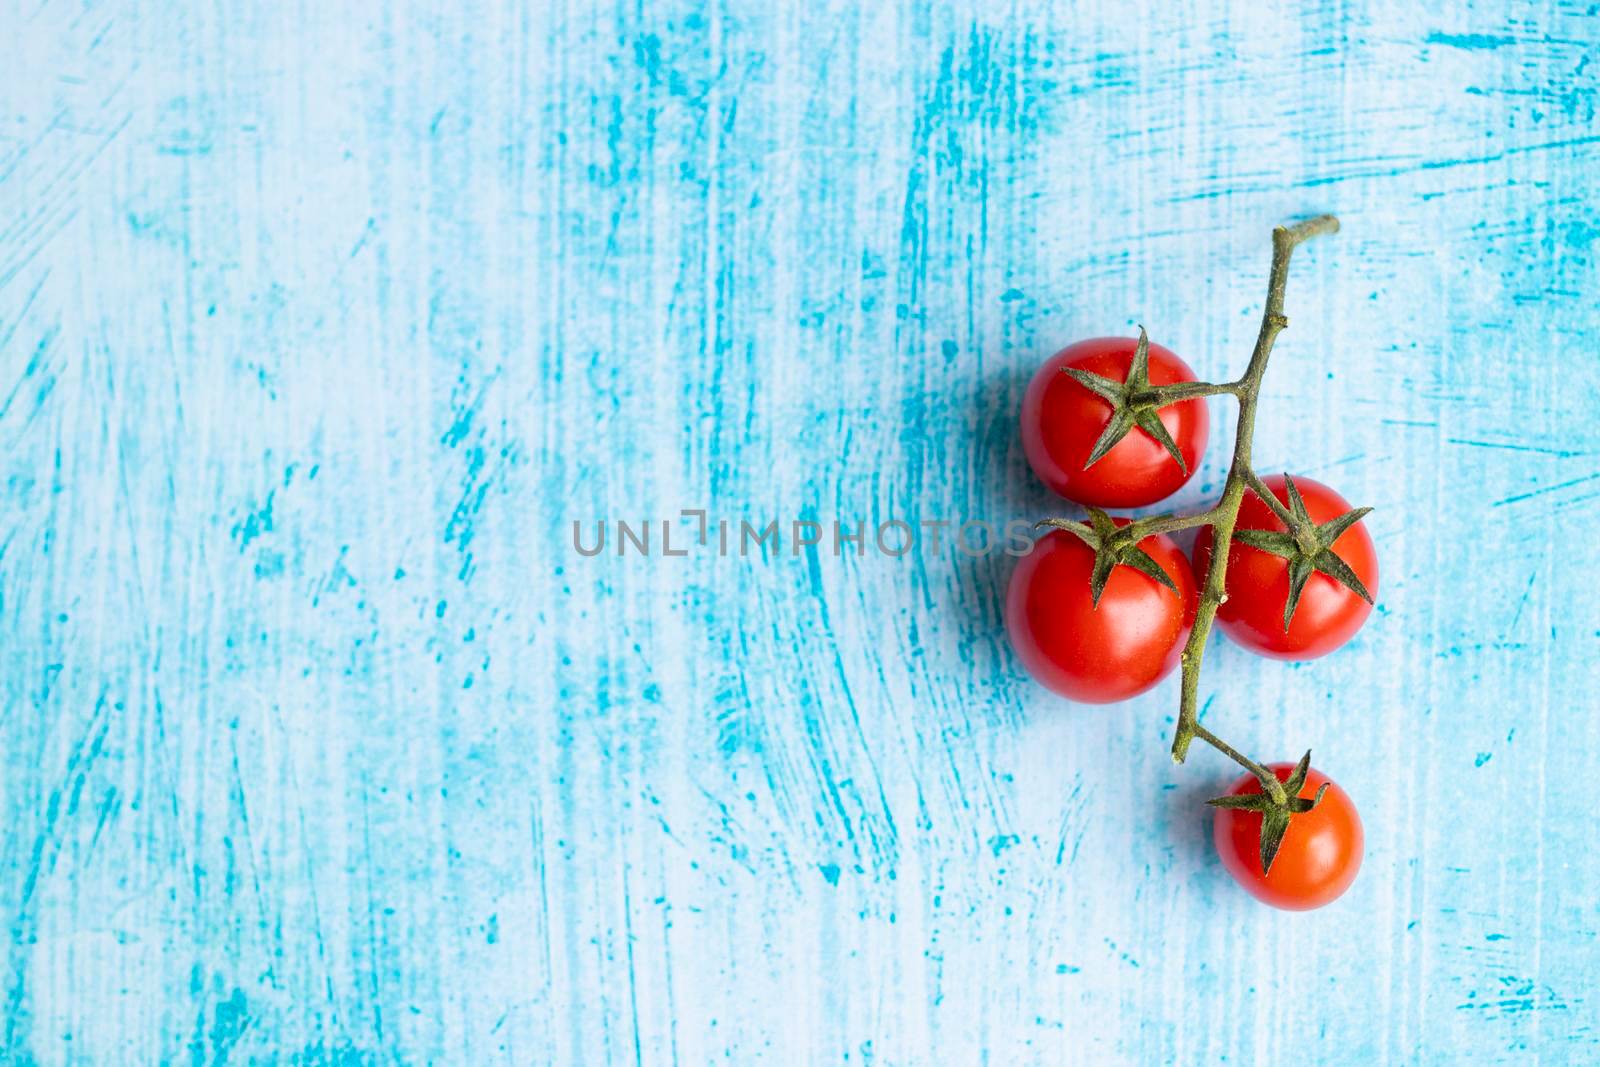 Cherry tomatoes on blue brushstroke background by eagg13